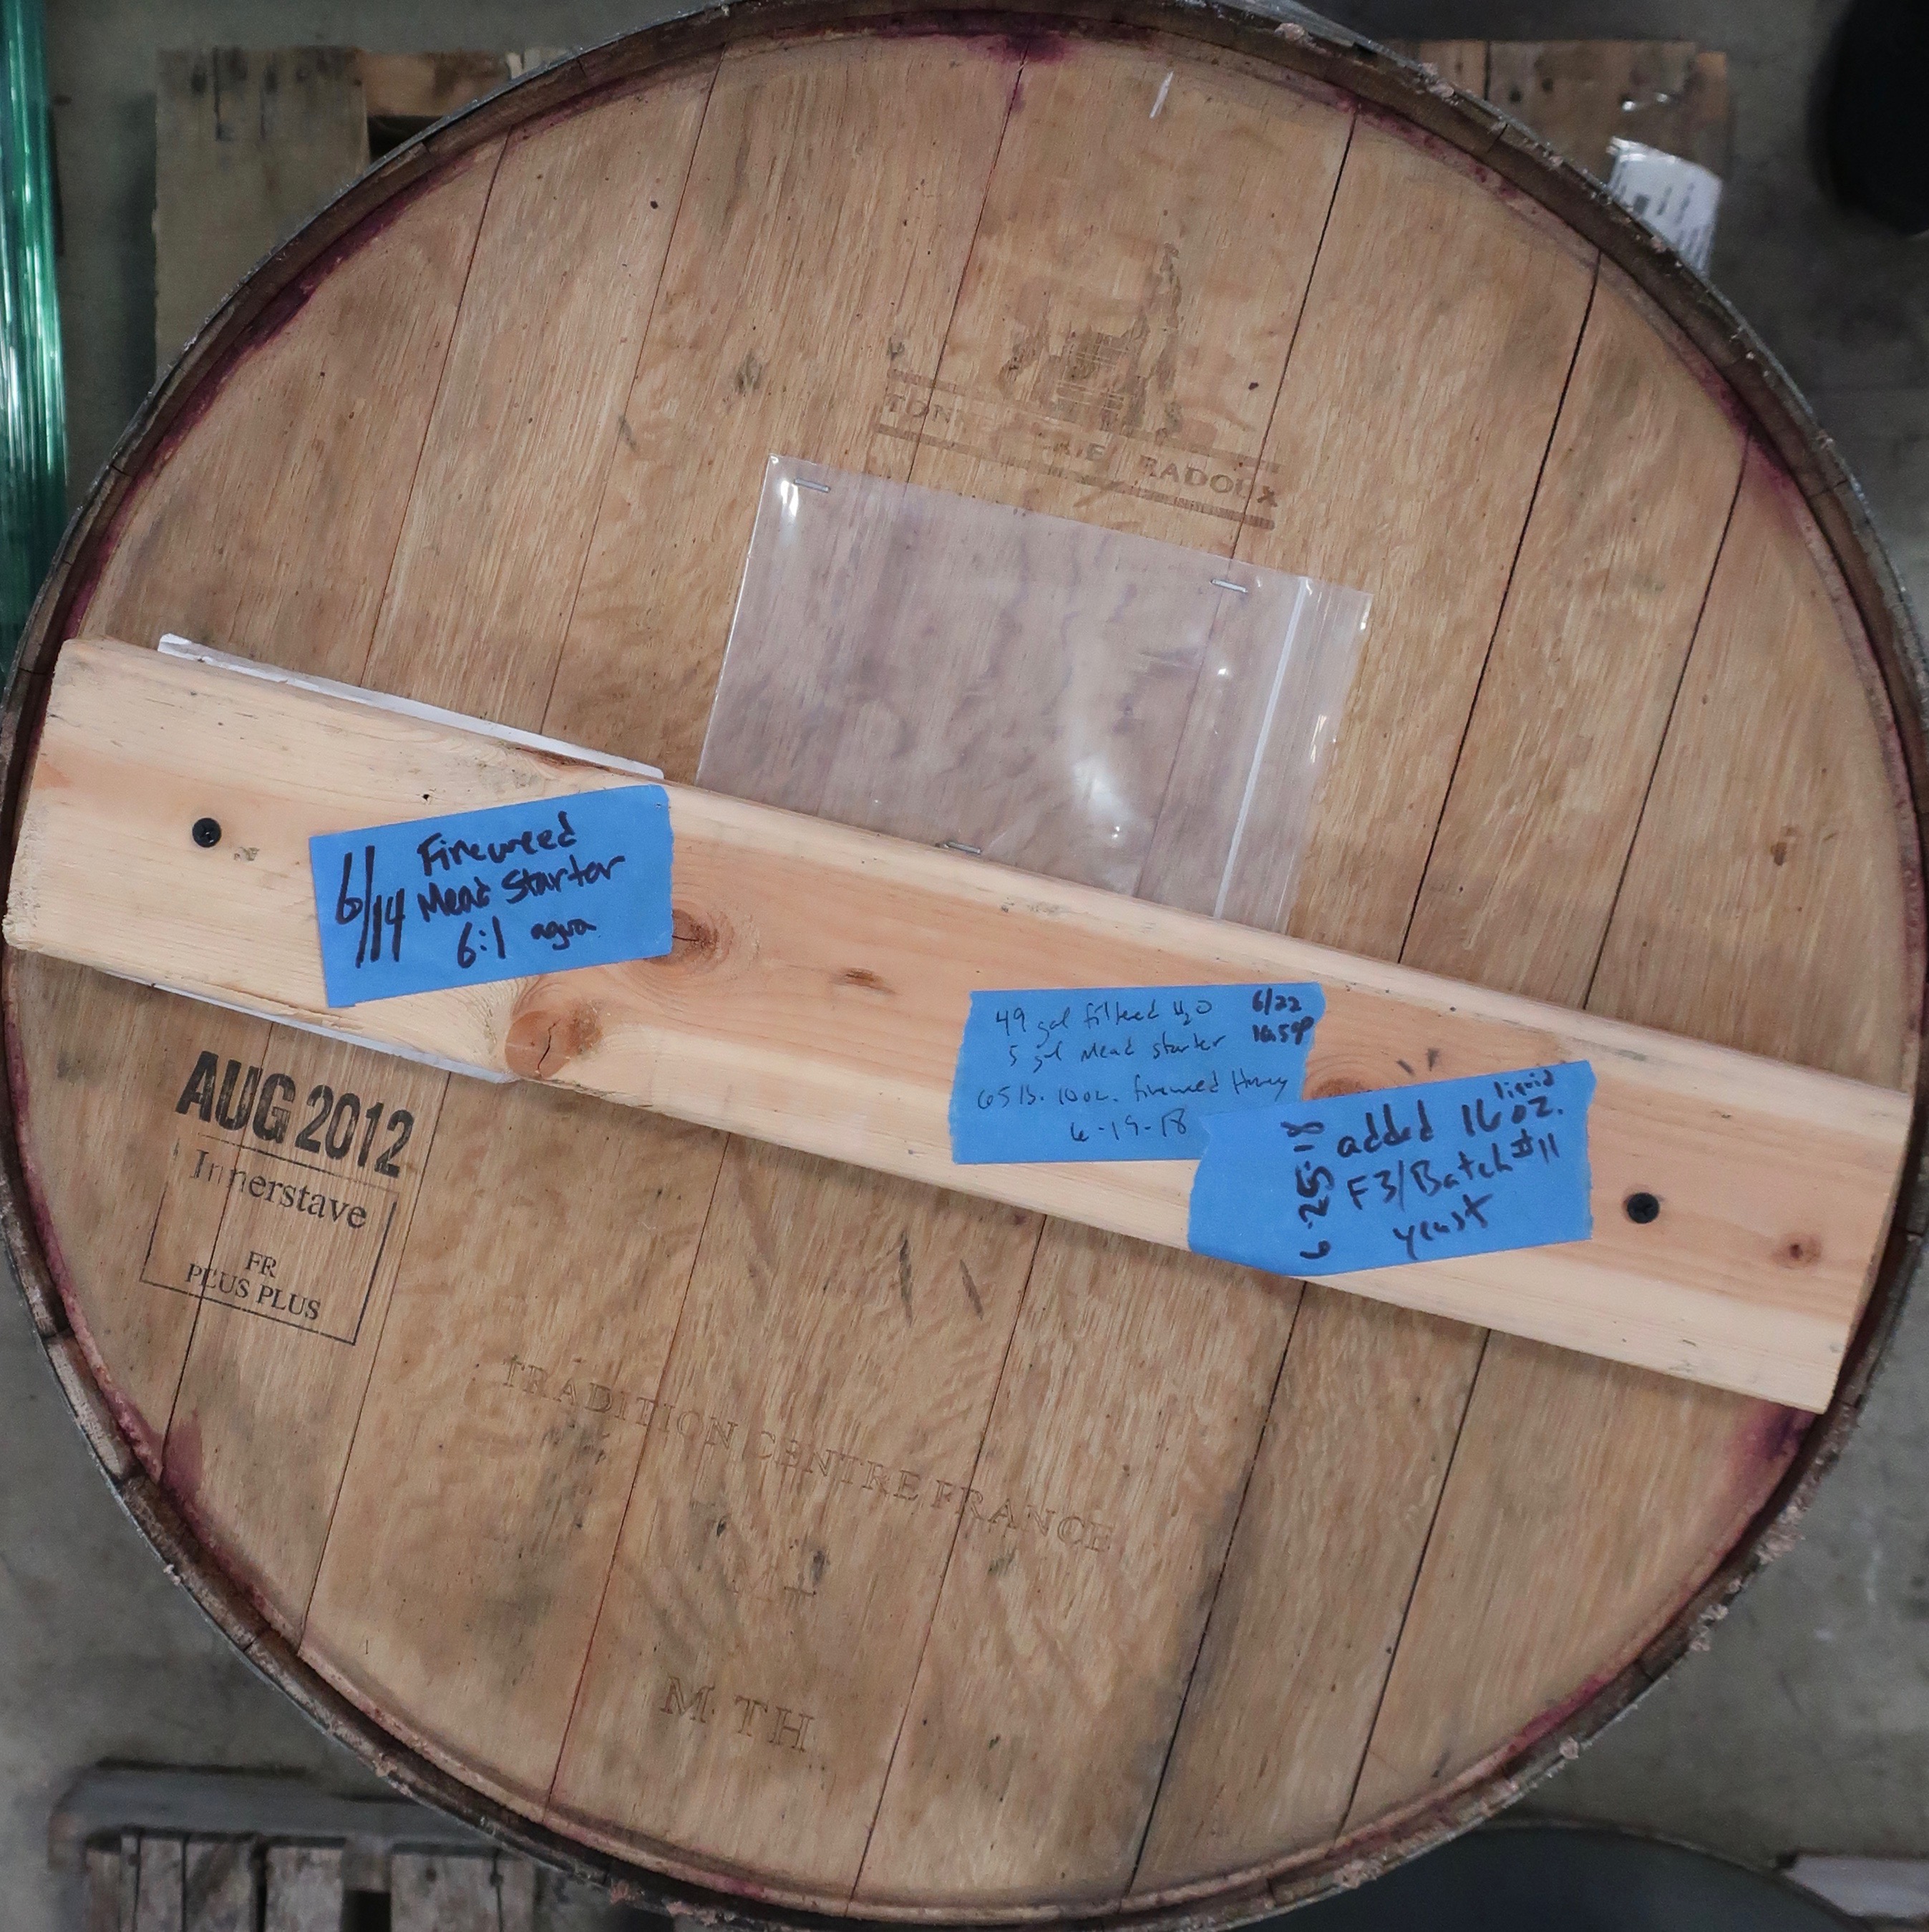 The top of the barrel of mead at Garden Path Fermentation.